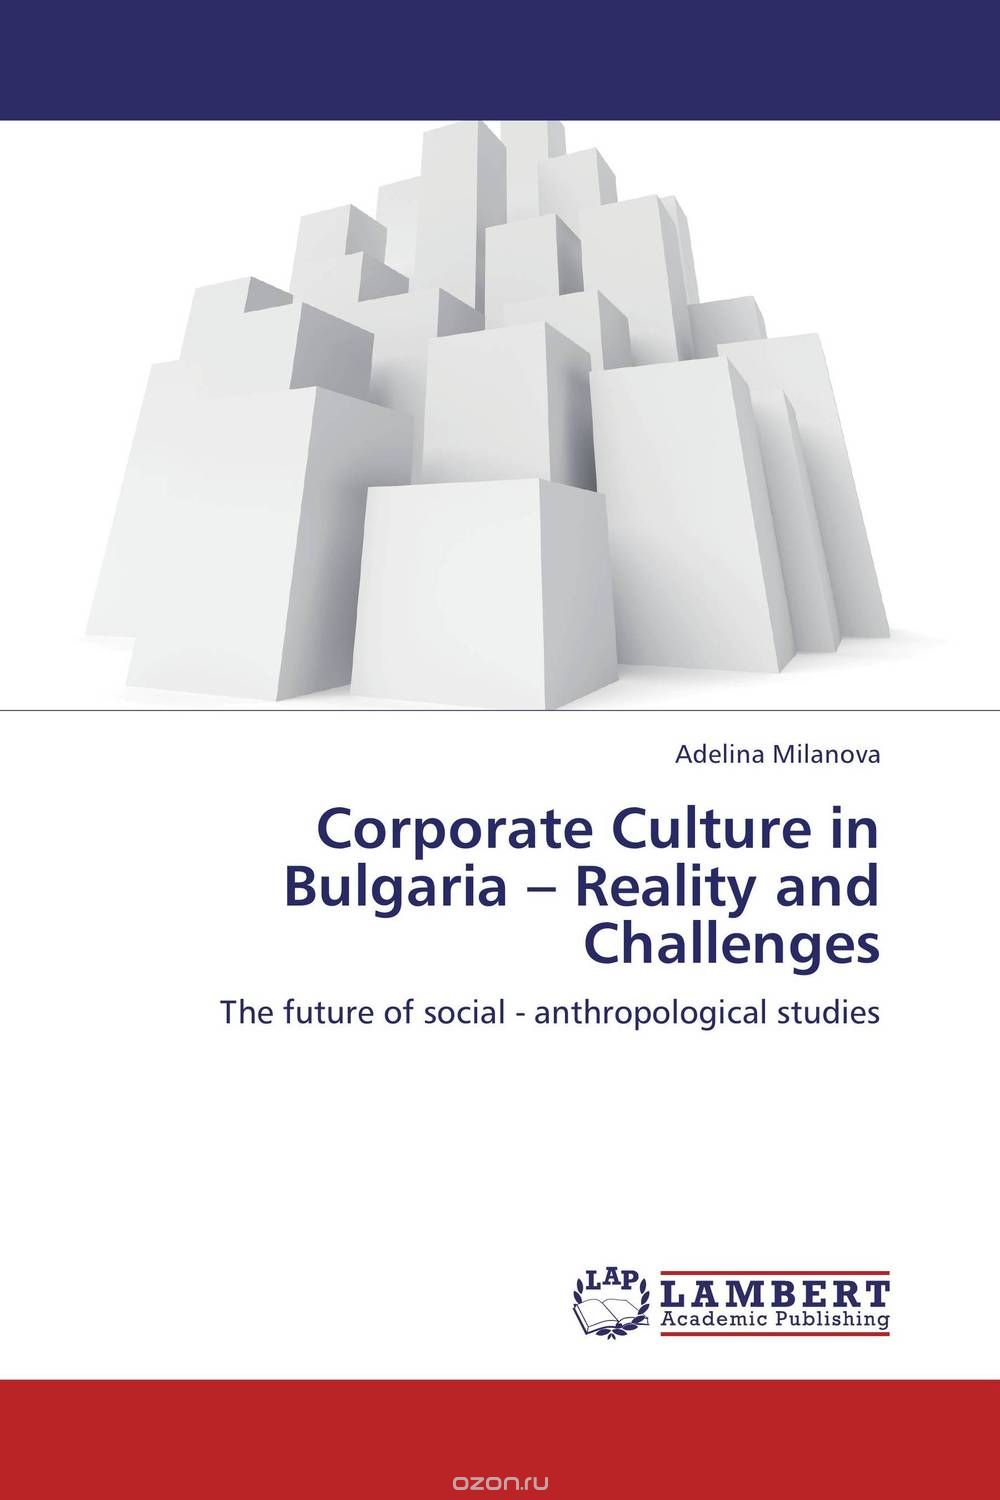 Corporate Culture in Bulgaria – Reality and Challenges